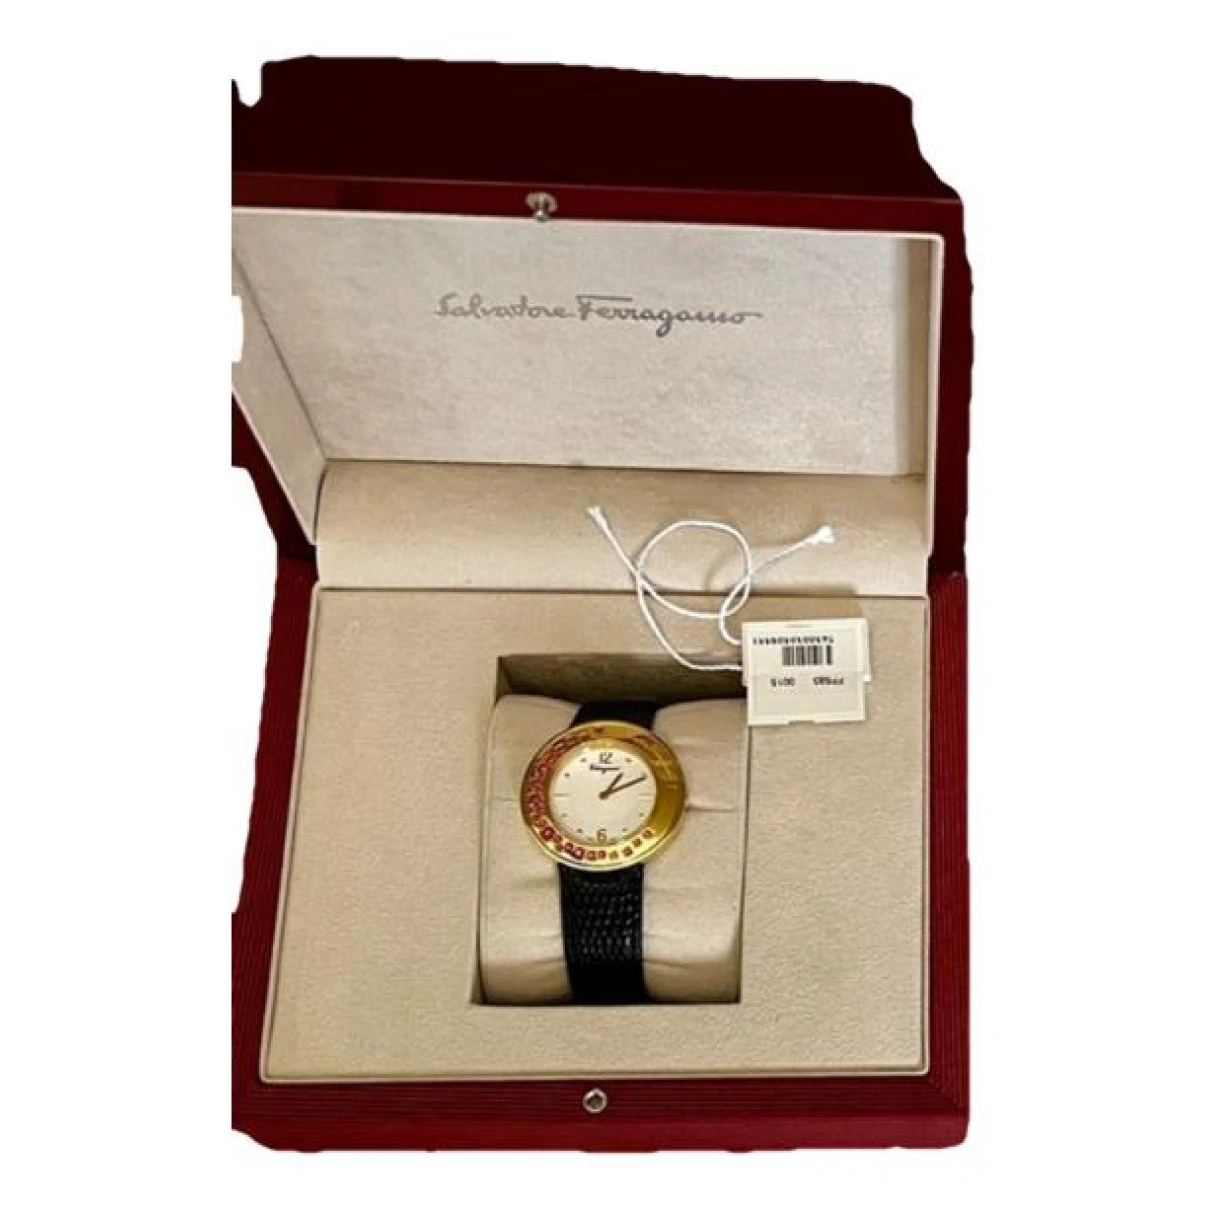 accessories Salvatore Ferragamo watches for Female gold and steel. Used condition